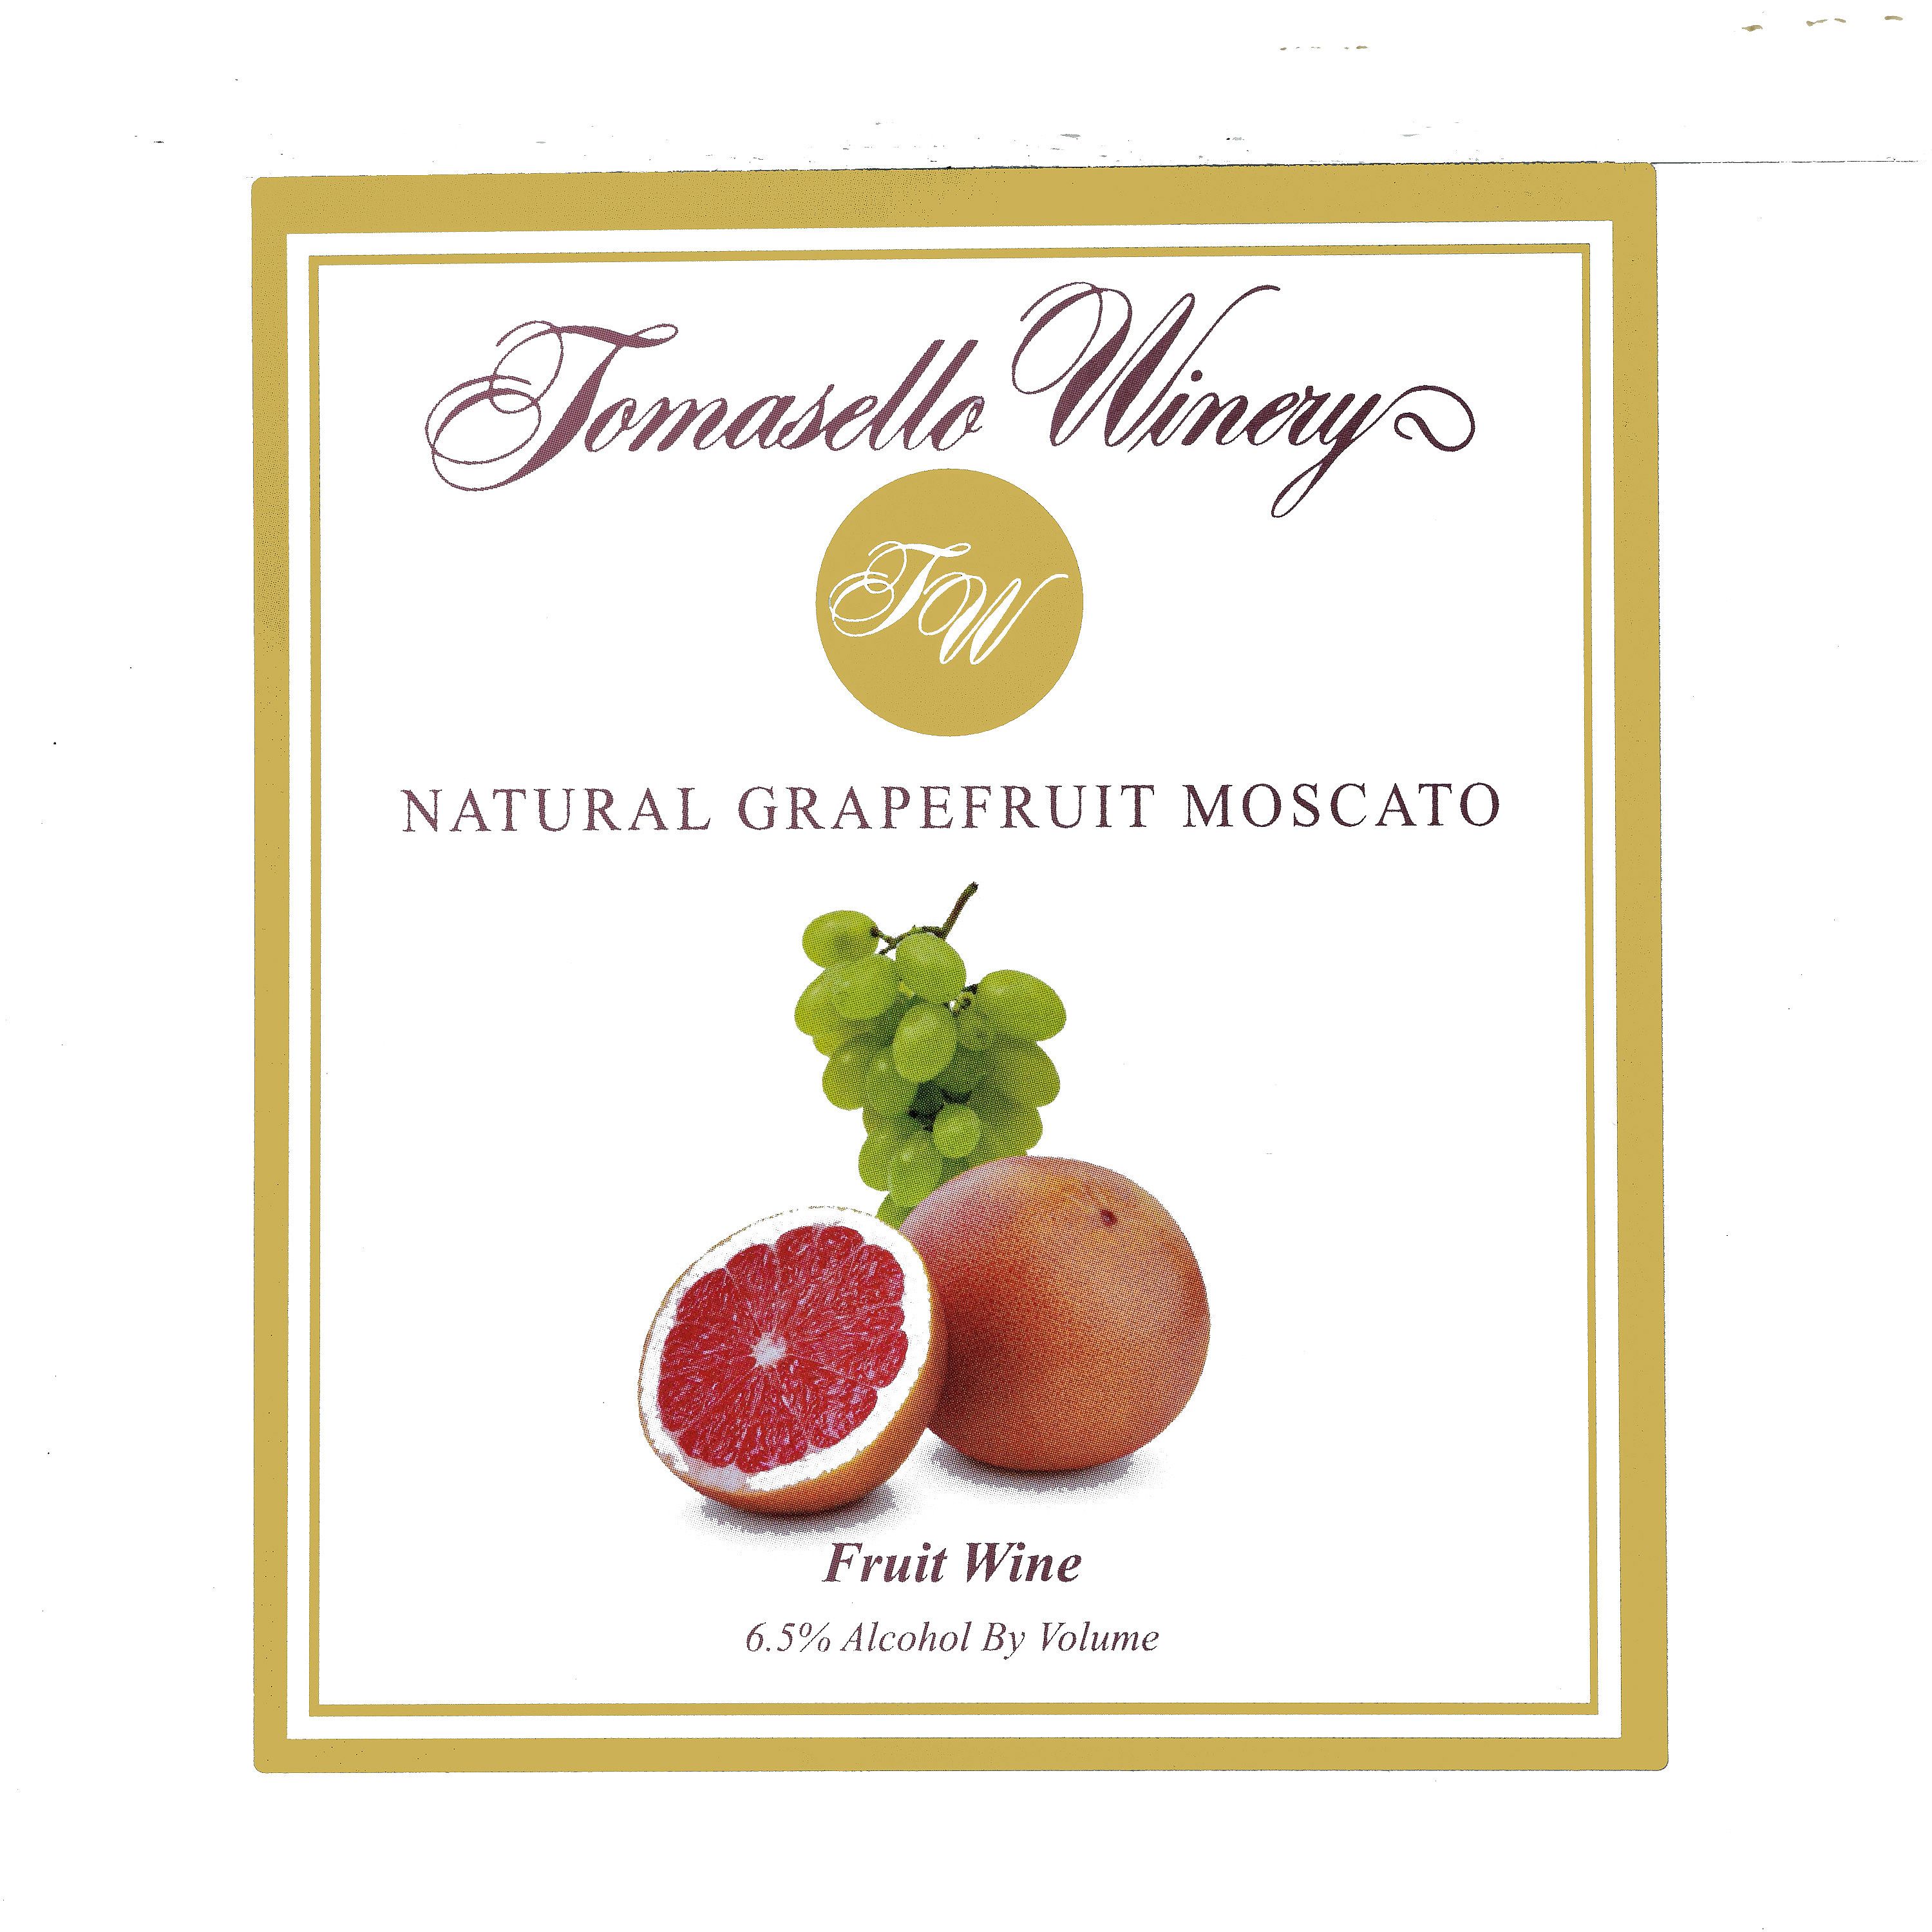 Product Image for Grapefruit Moscato